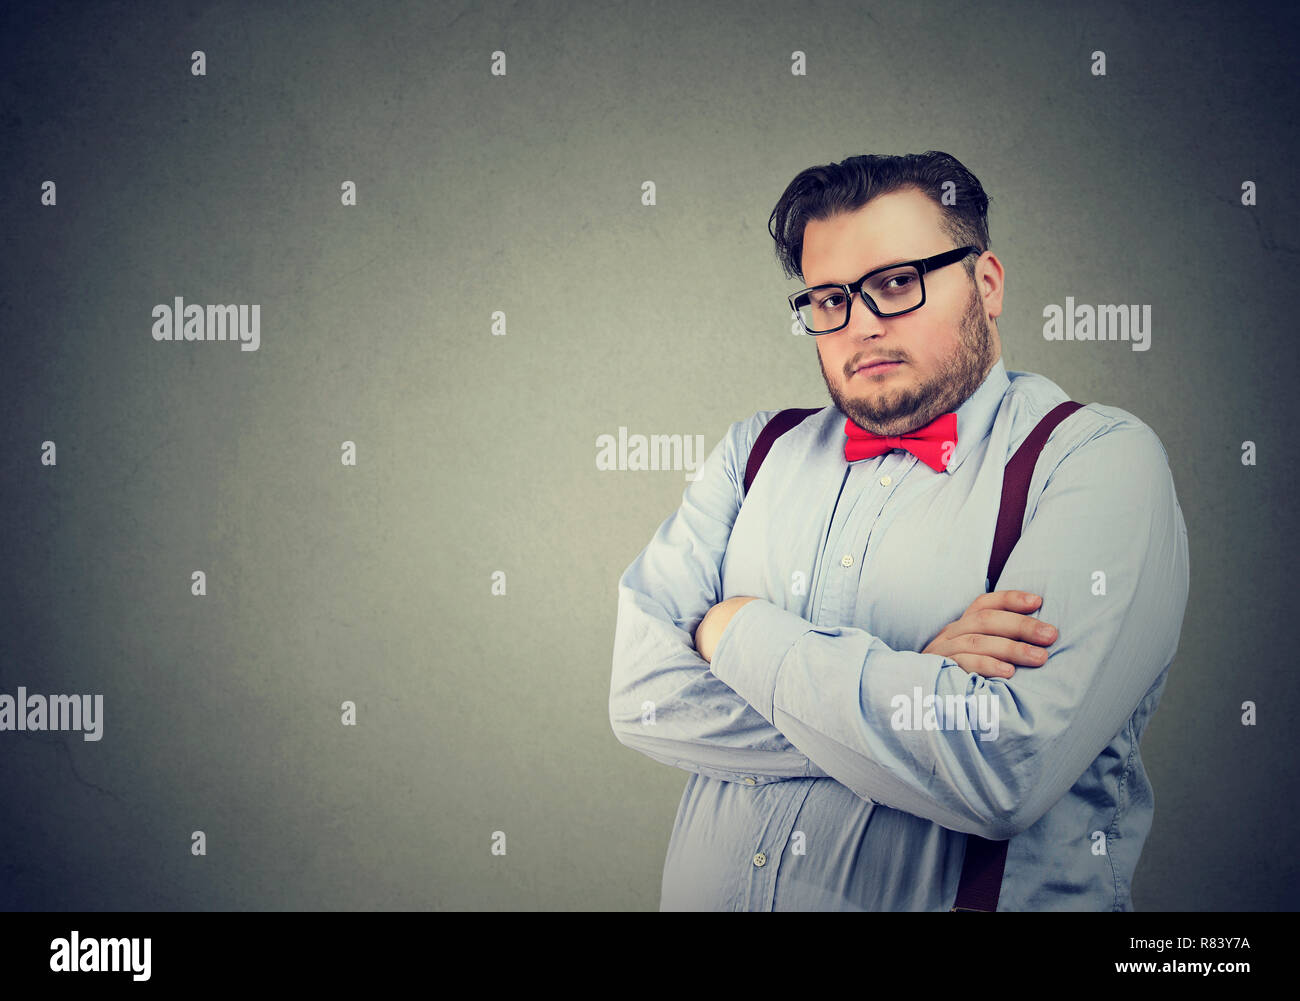 Portrait of a serious business man with snobbish face expression Stock Photo